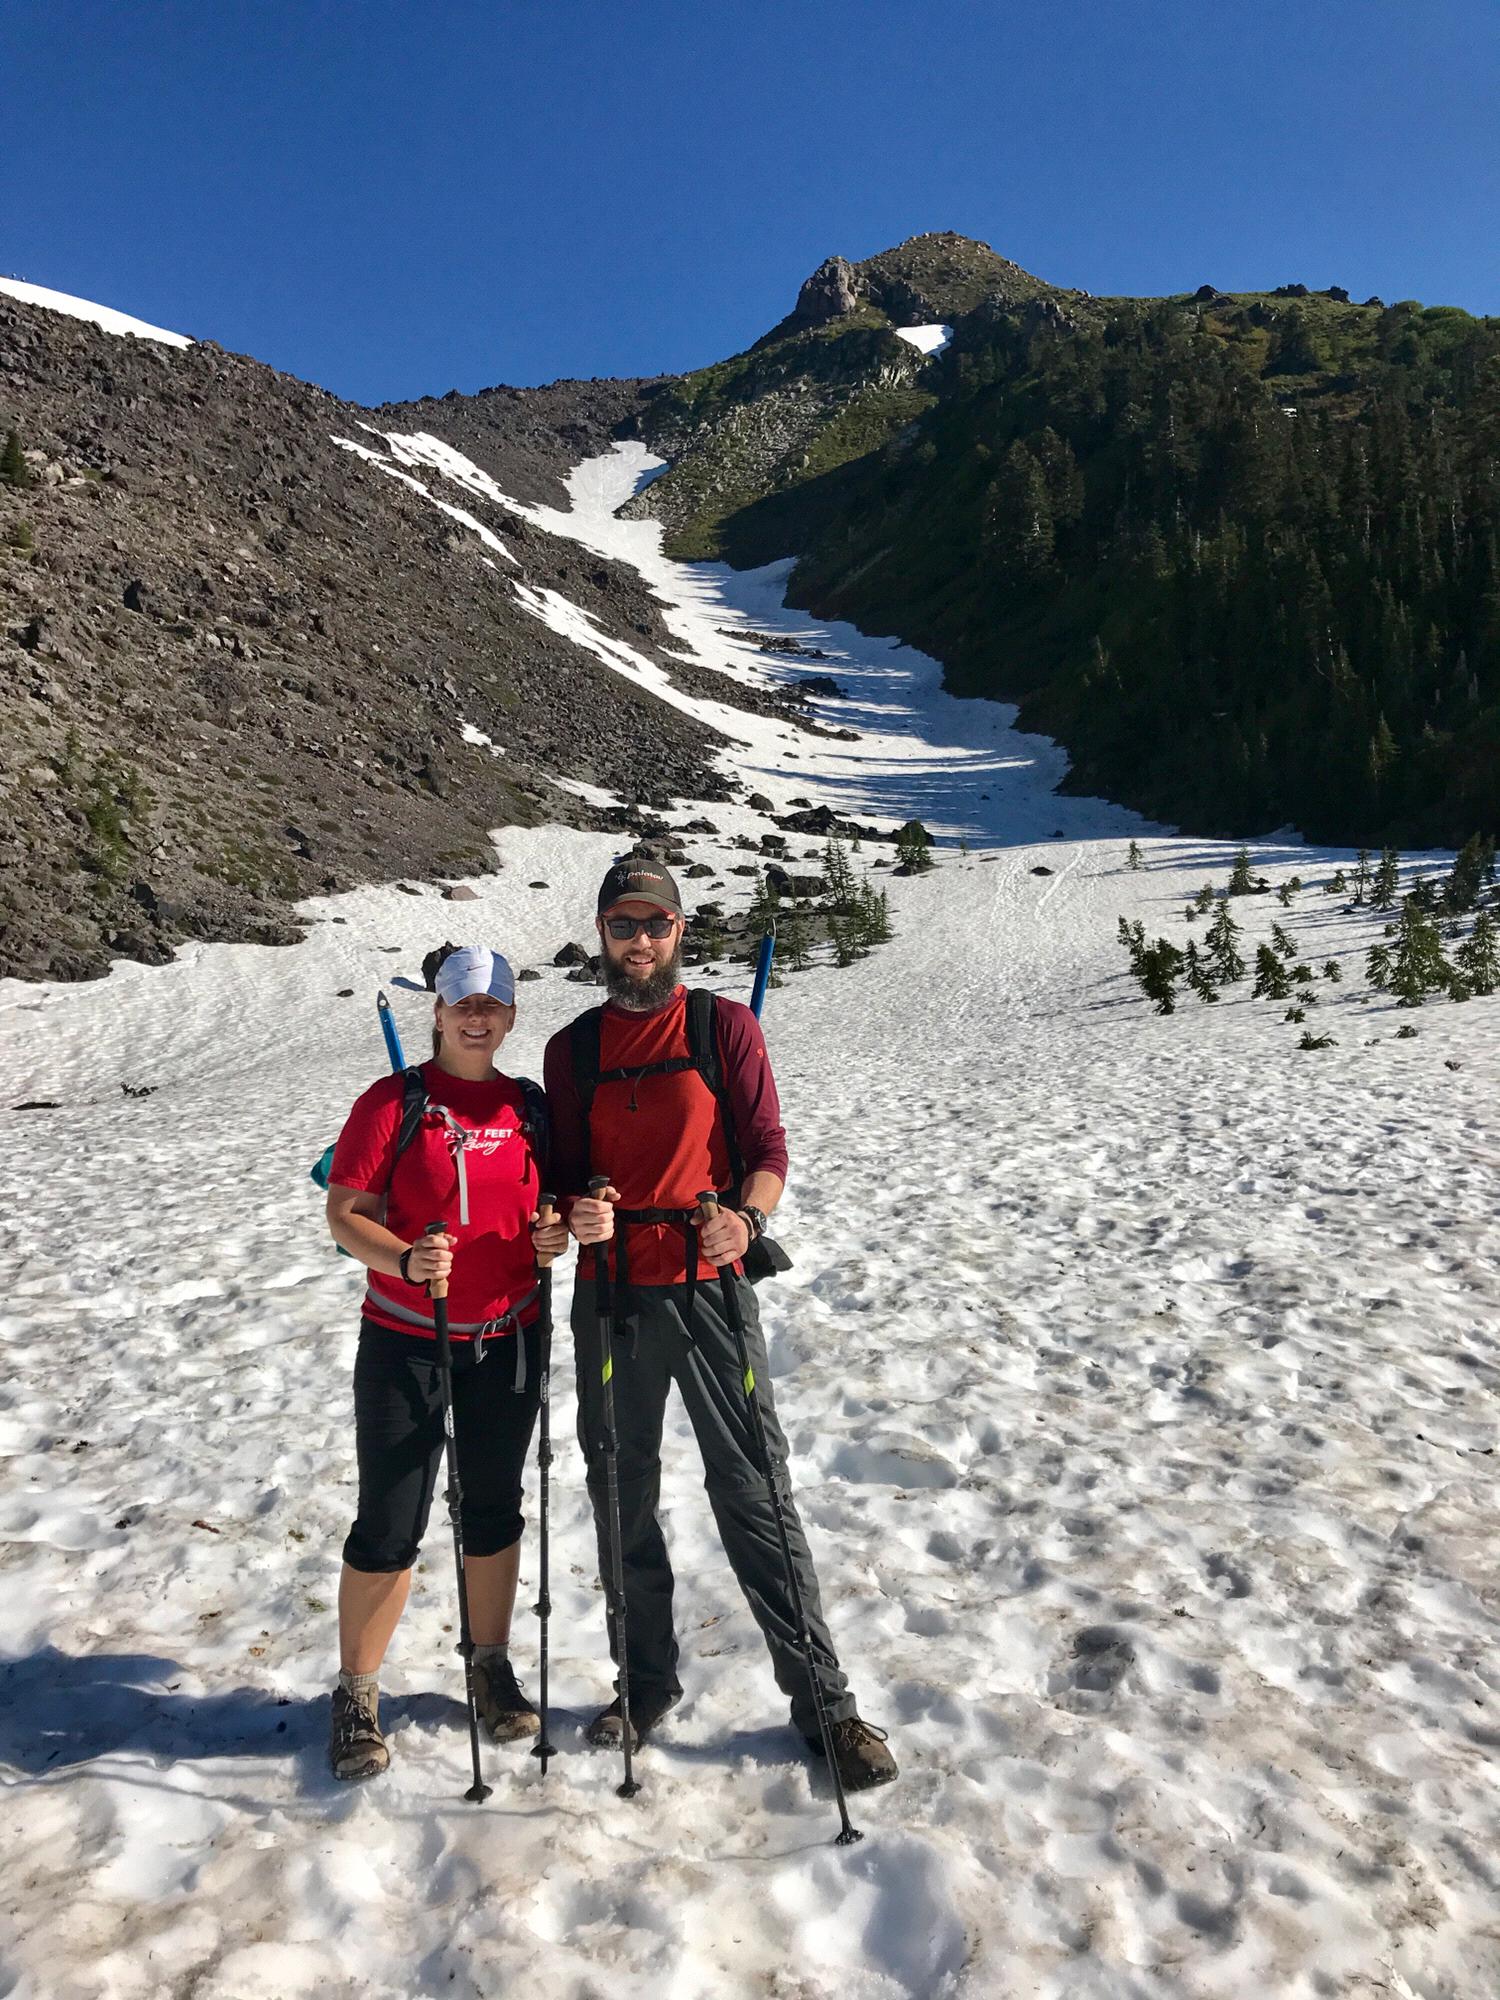 On our way up Mount St. Helens - June 2018